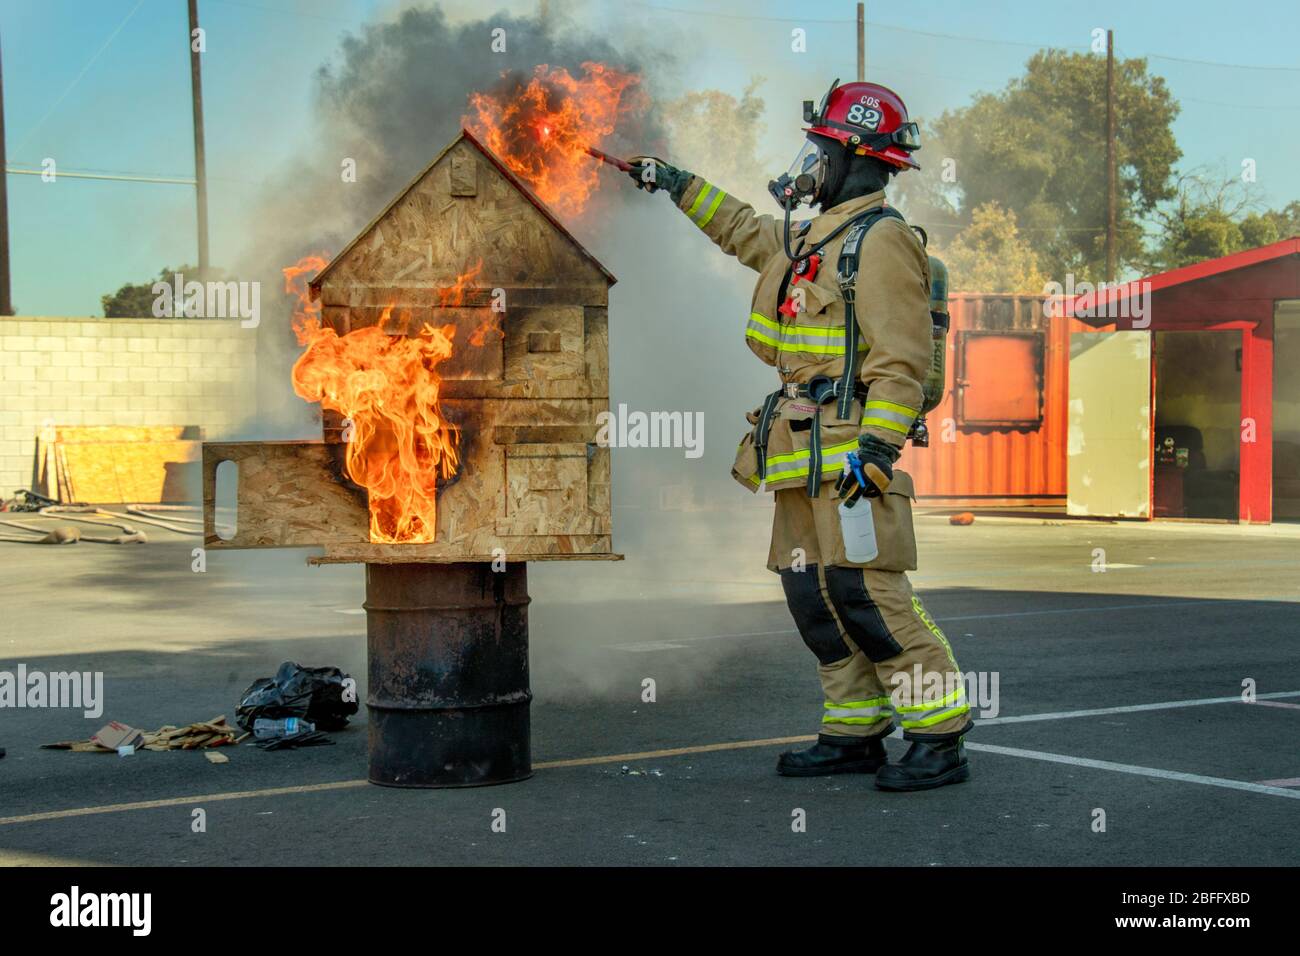 Using specially constructed 'doll house' with movable sections, a fireman demonstrates the ways in which fire can spread through a structure at a fire department demonstration in Costa Mesa, CA. Stock Photo